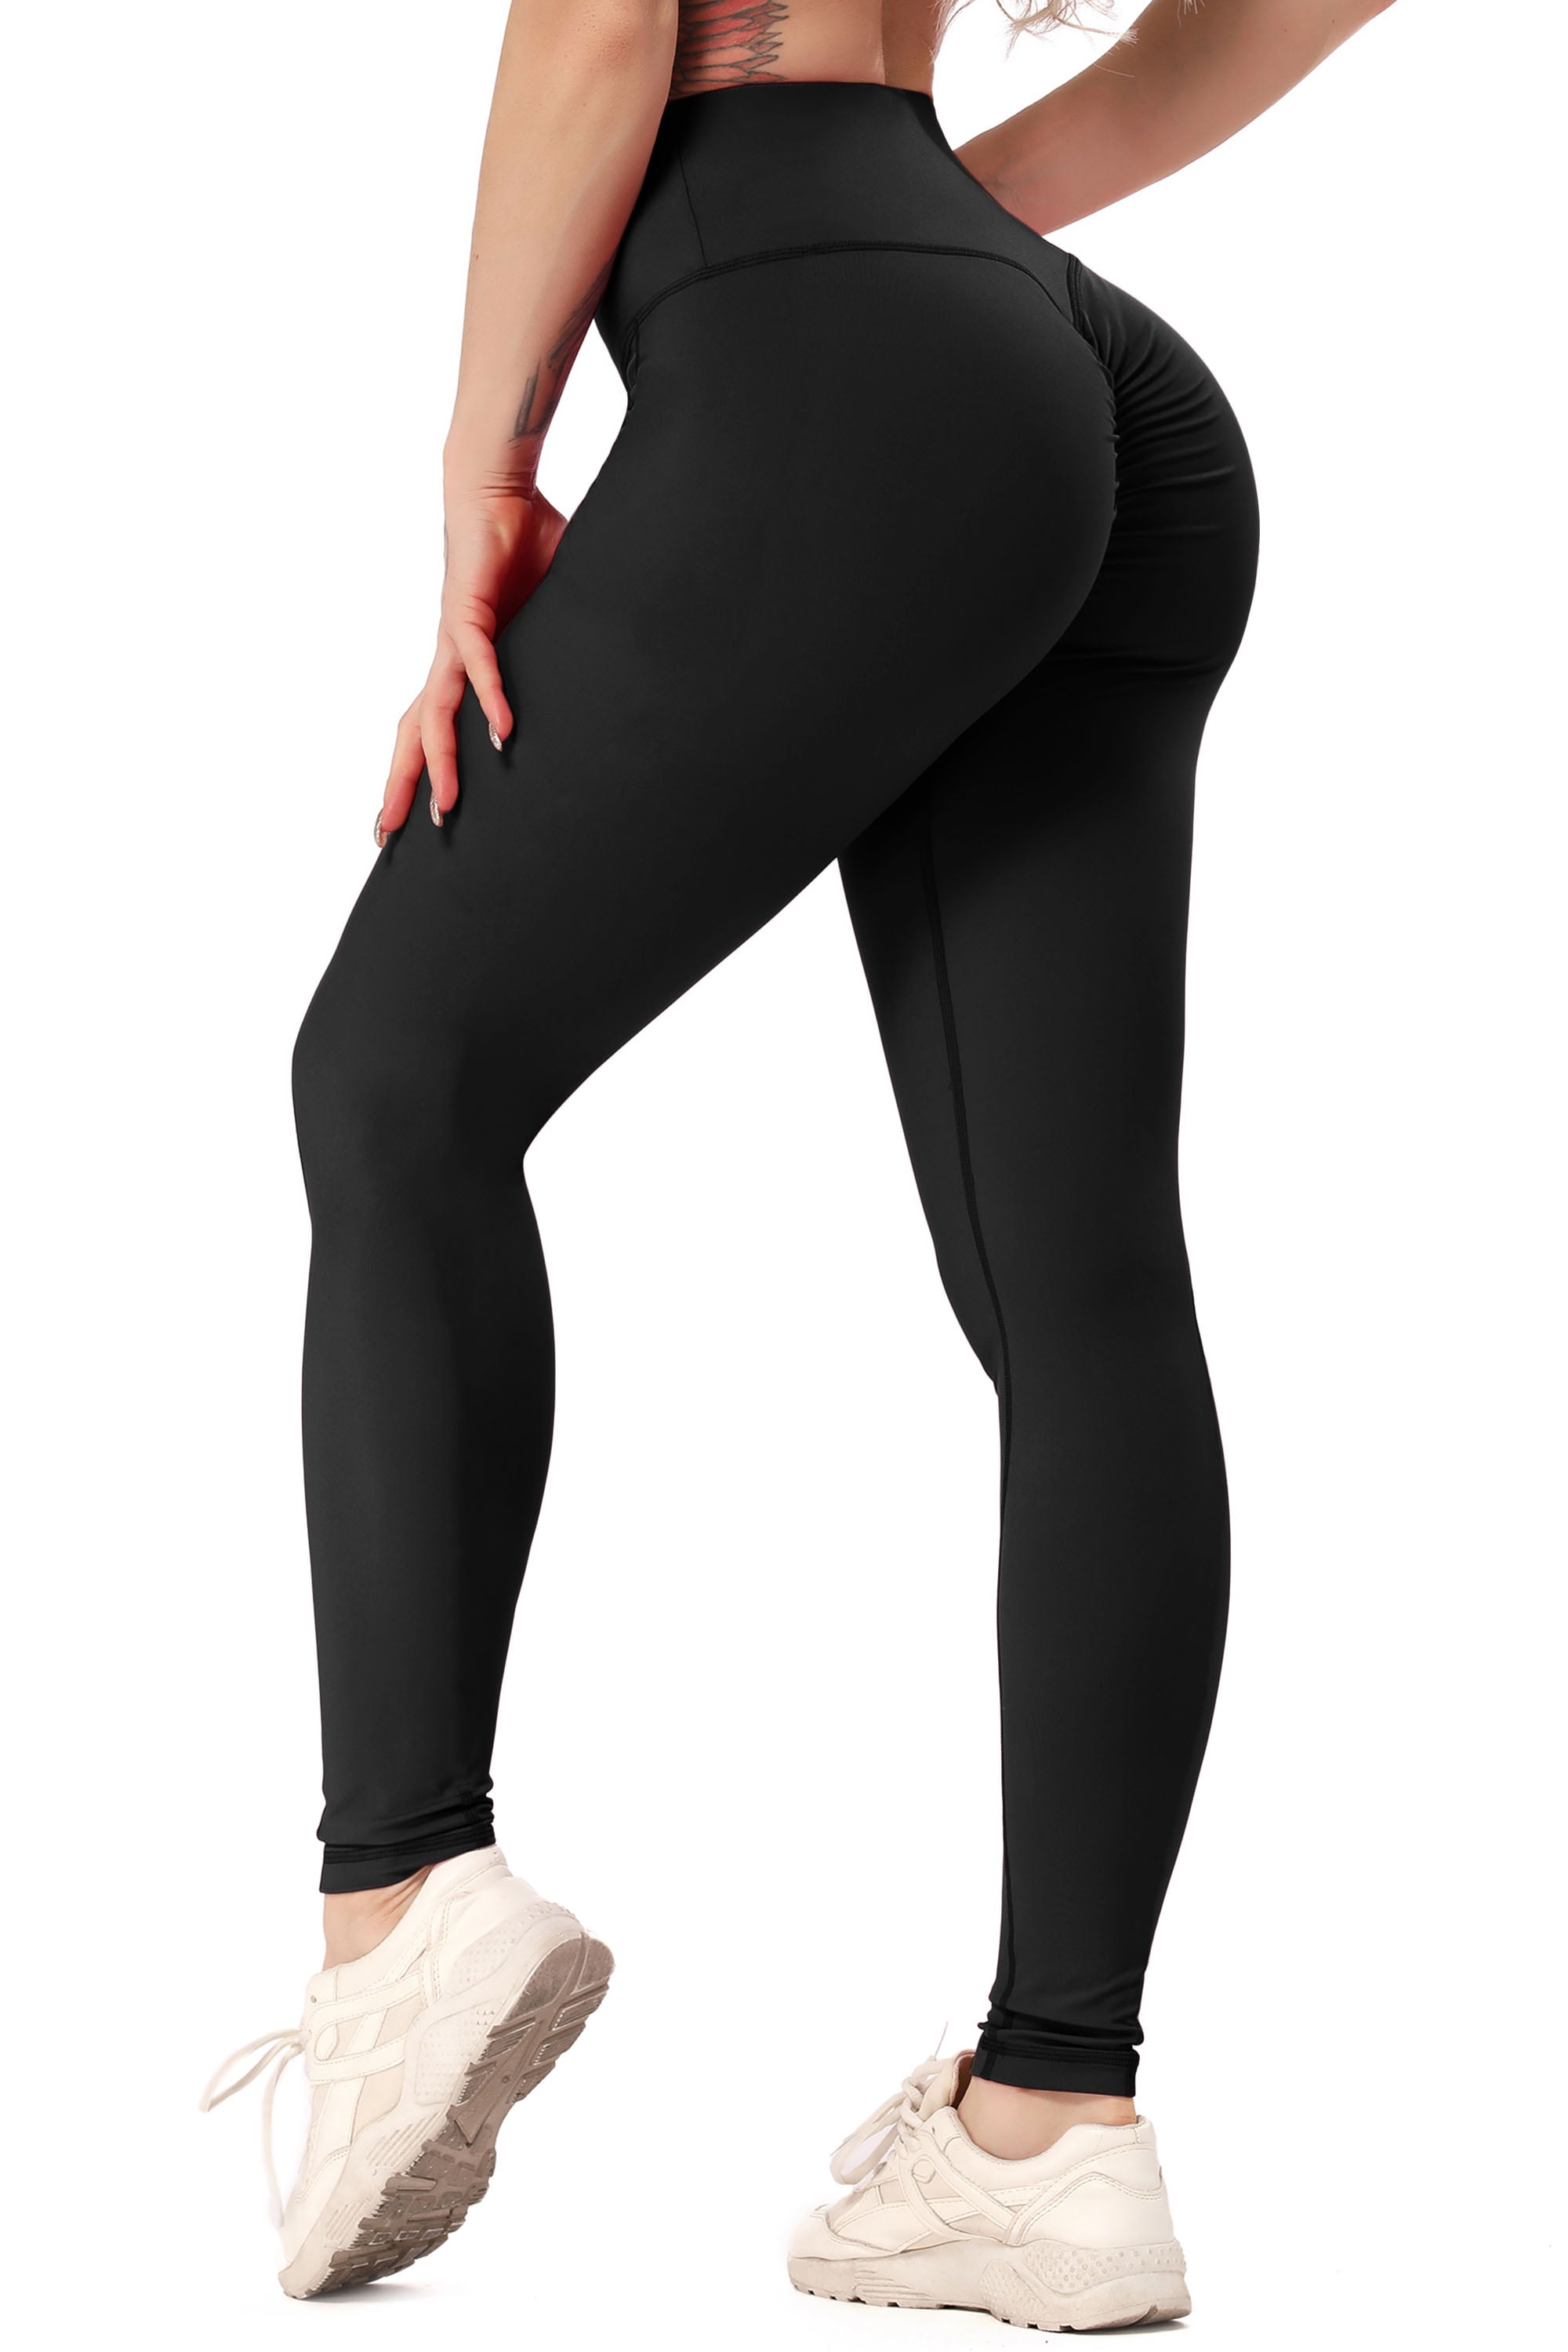 Women Butt Lift Yoga Pants High Waist Gym Leggings Ruched Workout Booty Trousers 